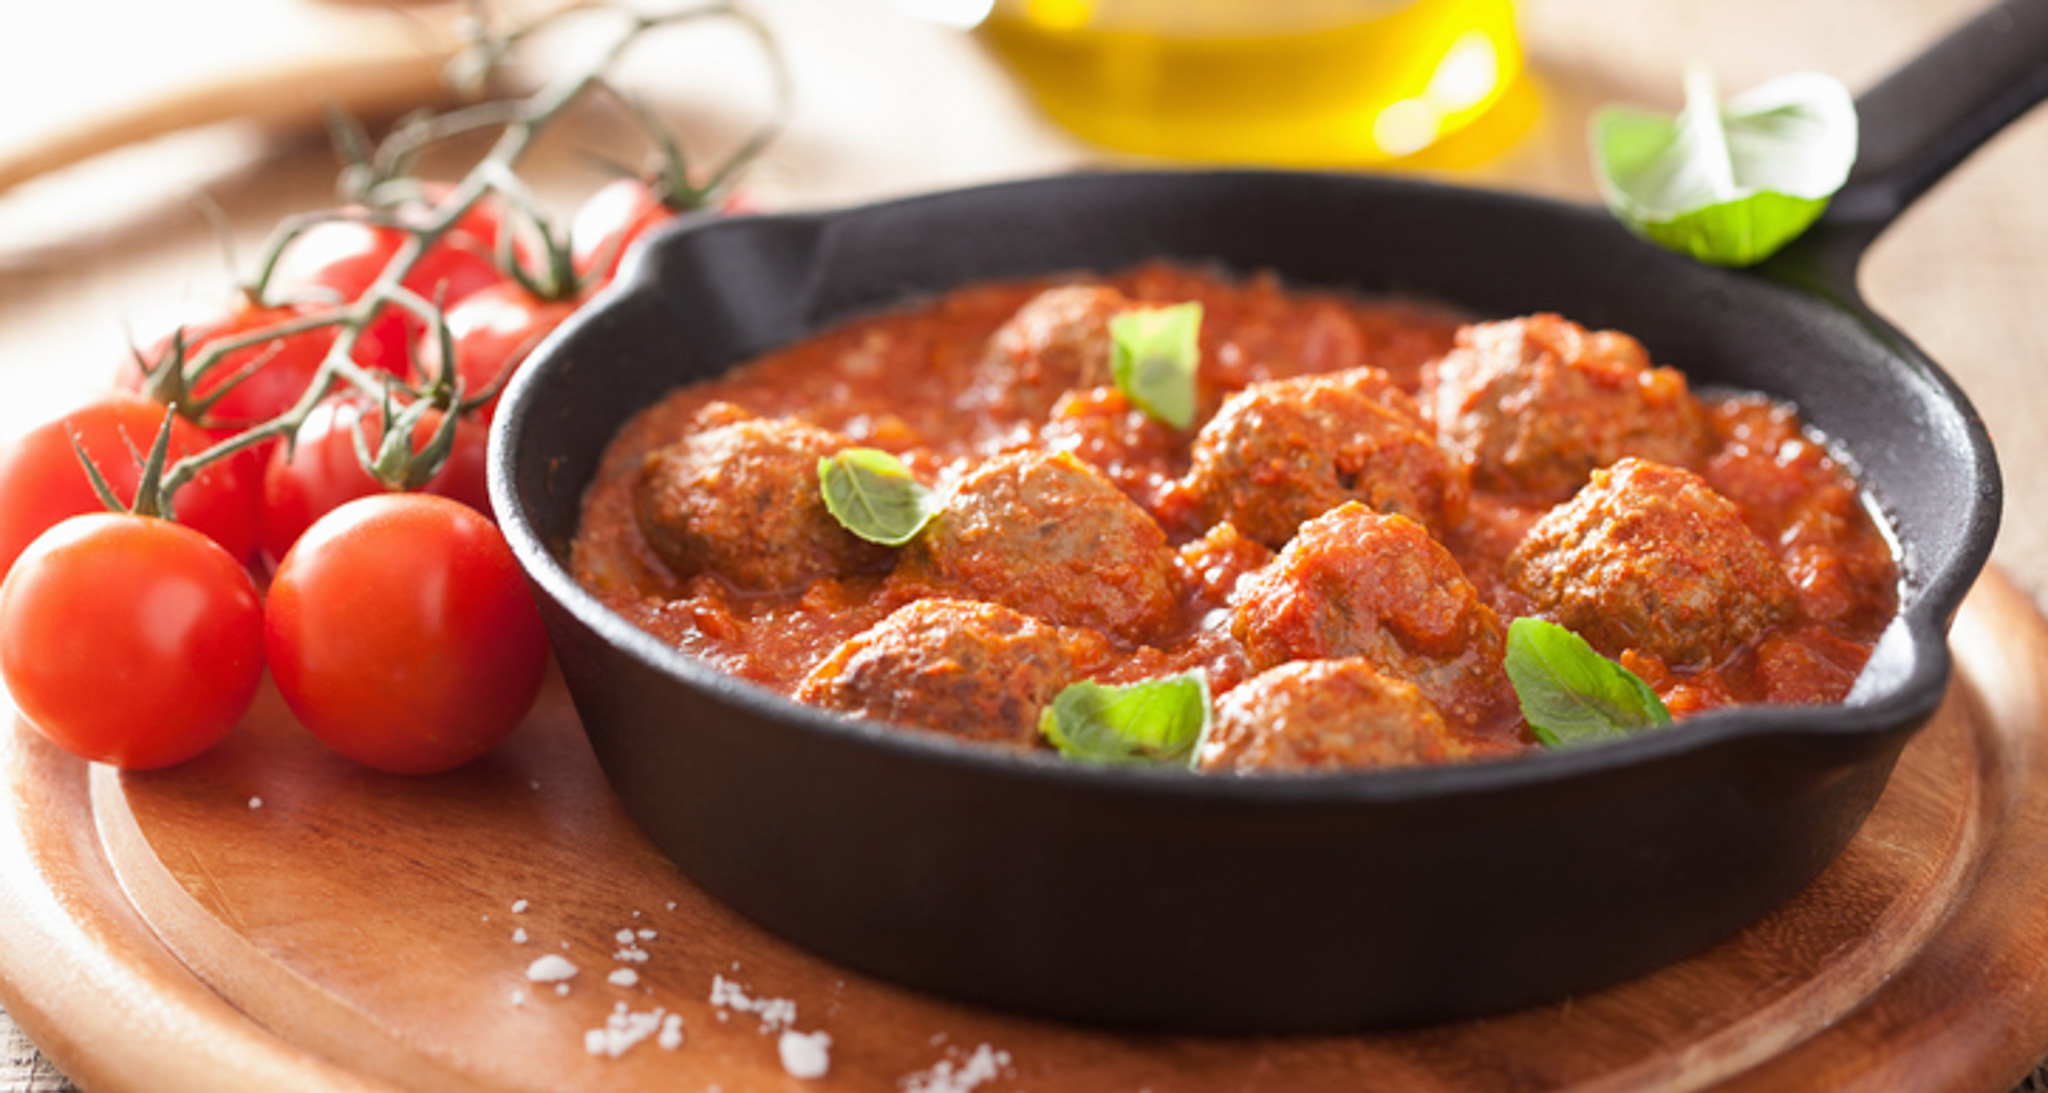 MEATBALLS WITH PEPPERS AND TOMATO DIP